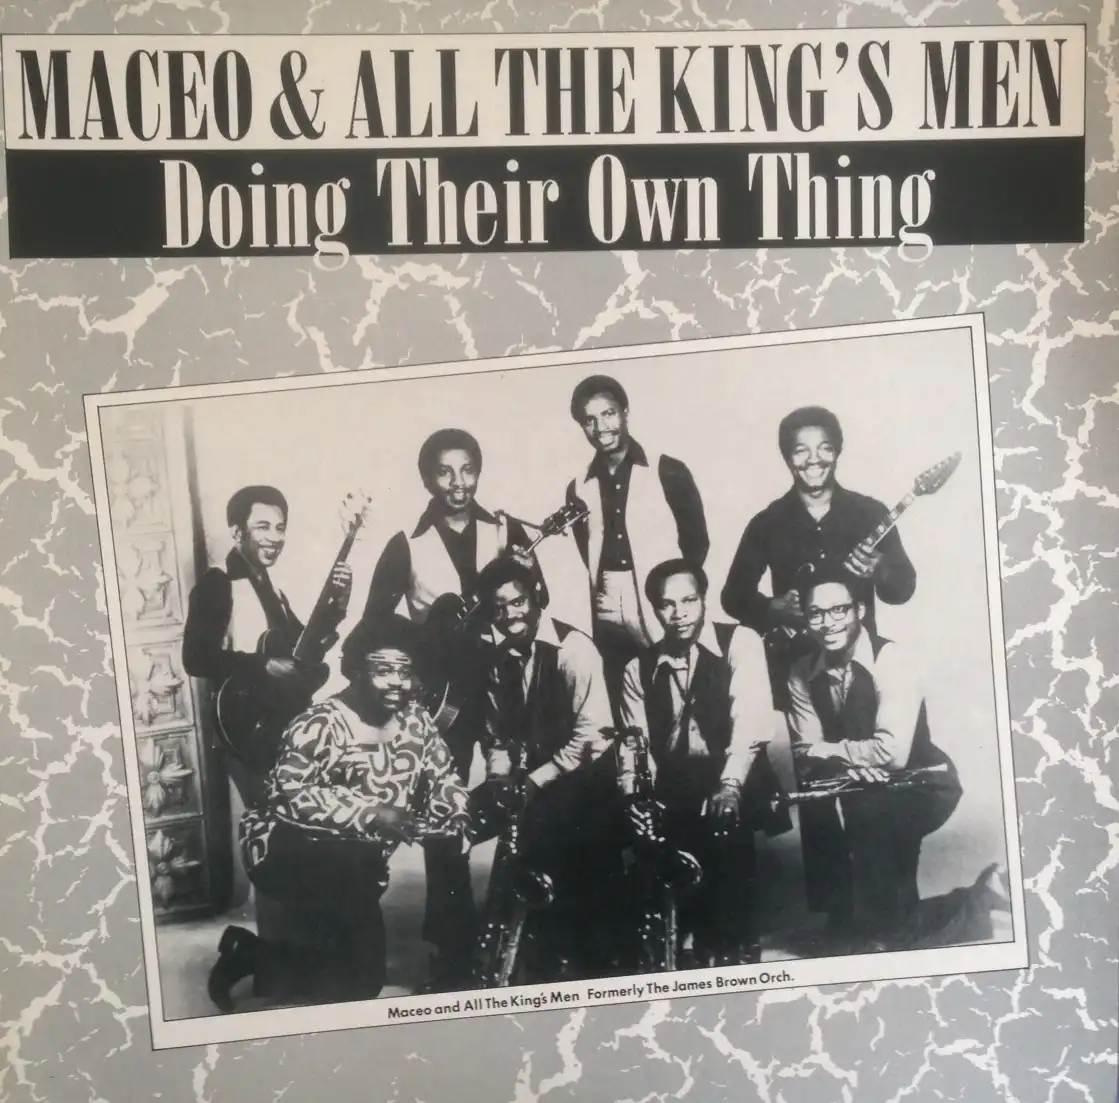 MACEO & ALL THE KING'S MEN / DOING THEIR OWN THING